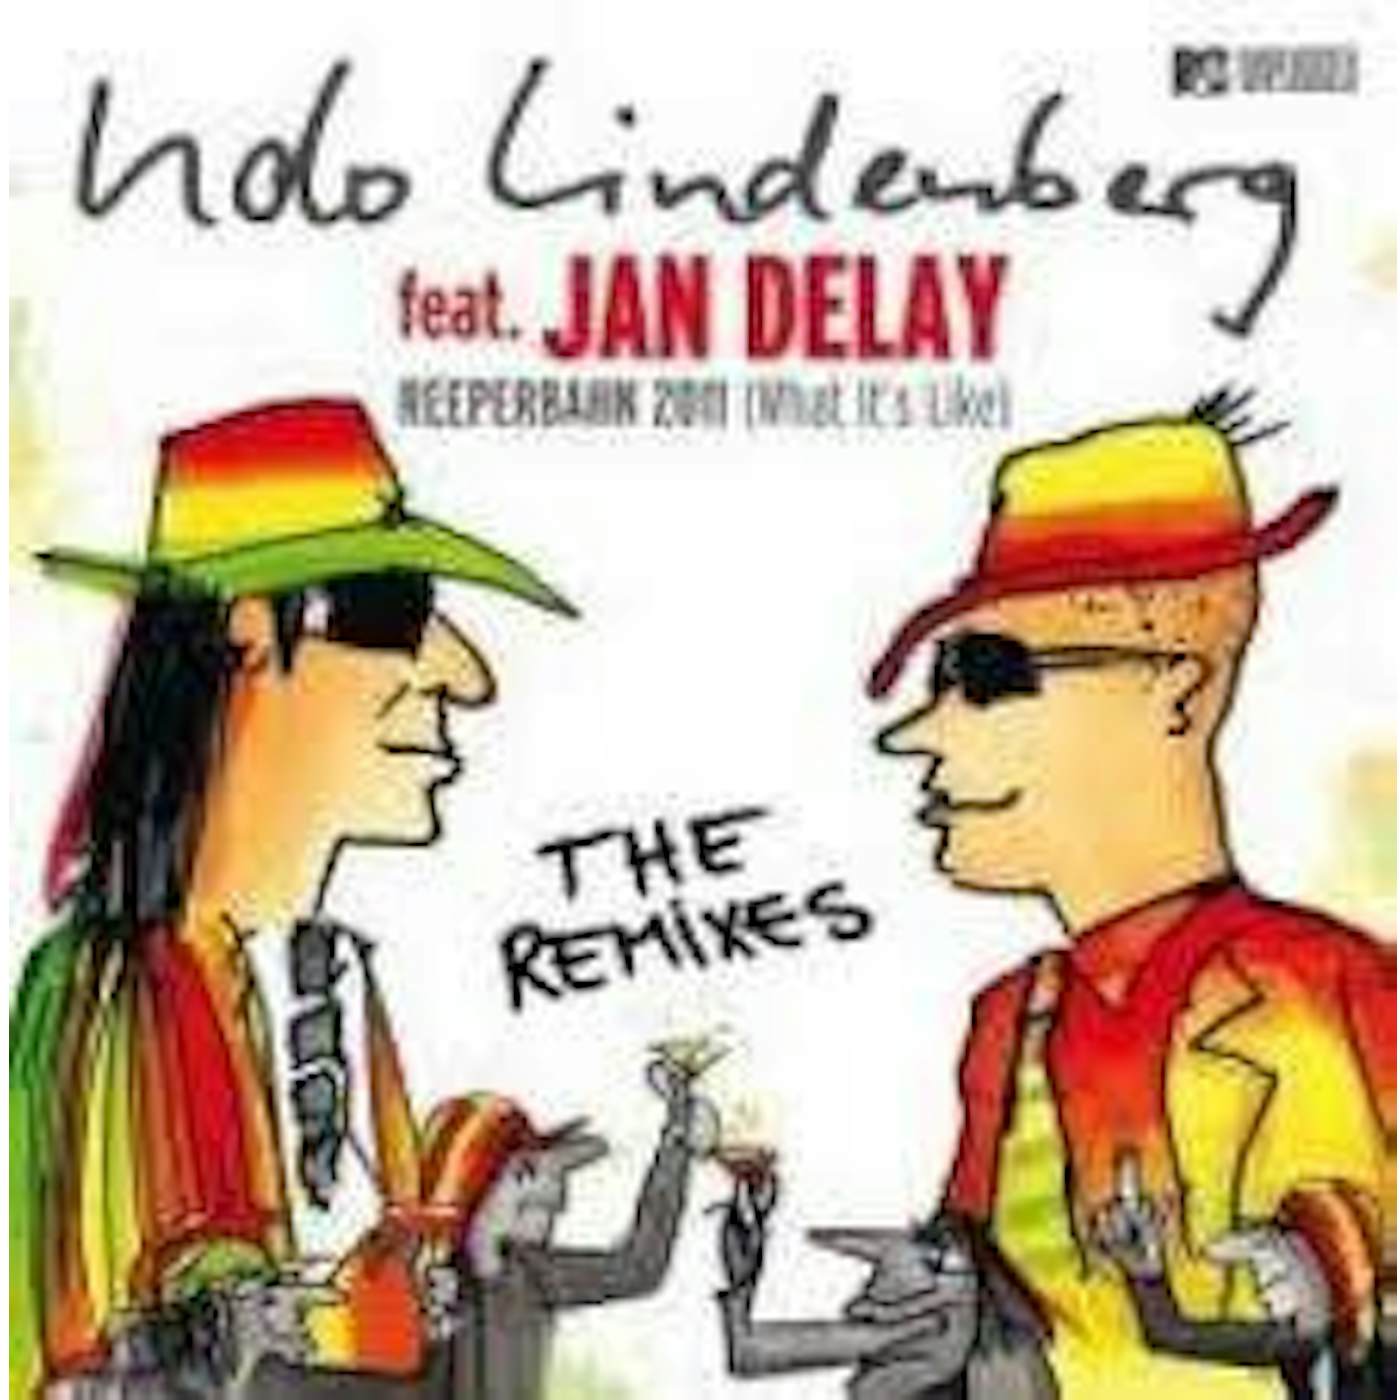 Udo Lindenberg REEPERBAHN 2011 WHAT IT'S LIKE-THE REMIXES Vinyl Record